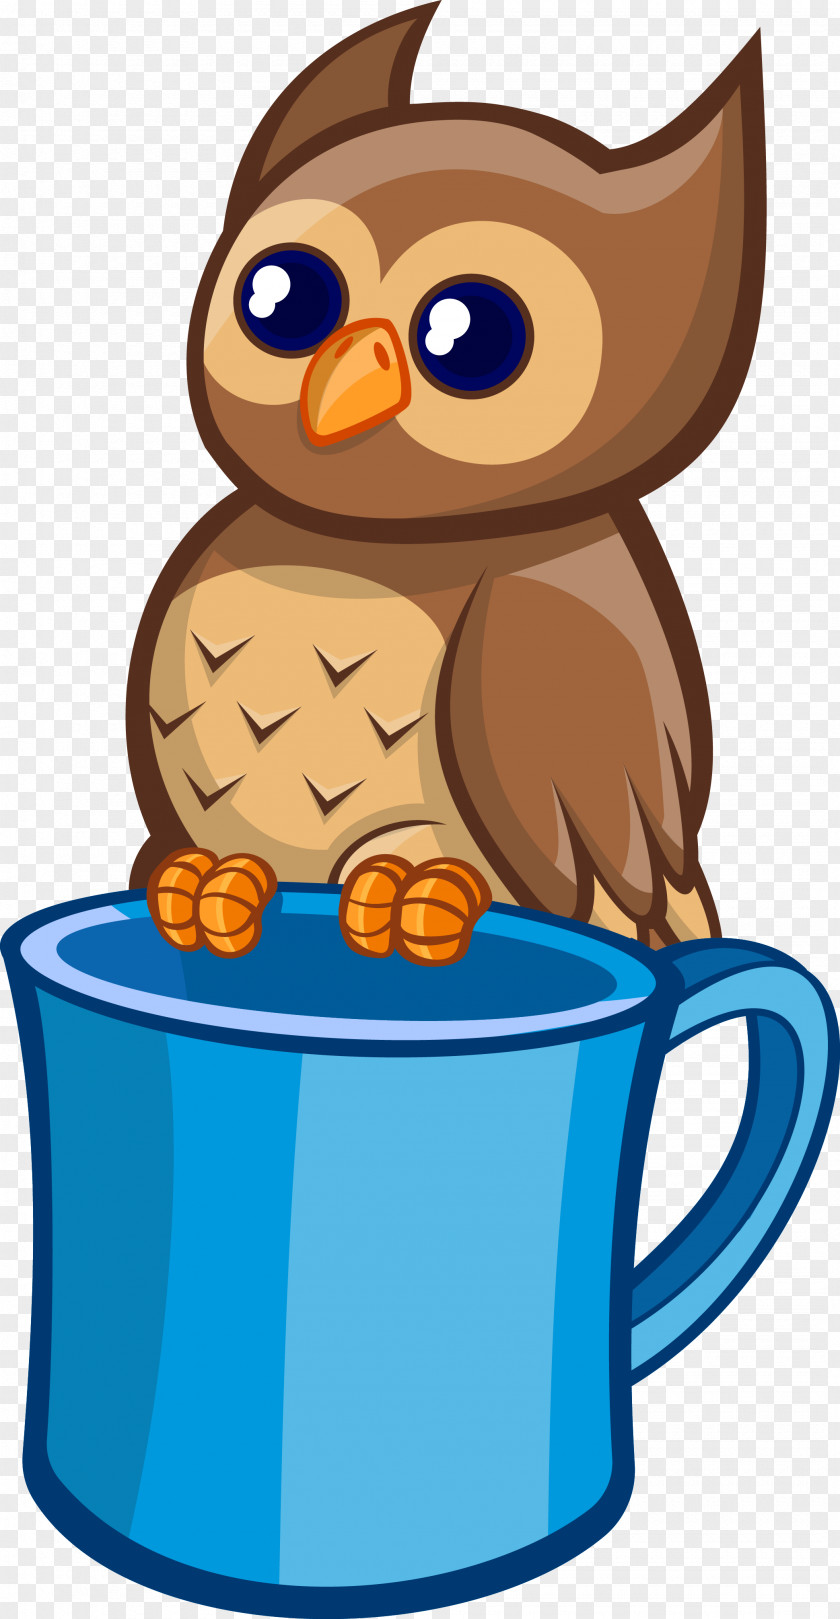 Free For Commercial Use Owl Clip Art PNG